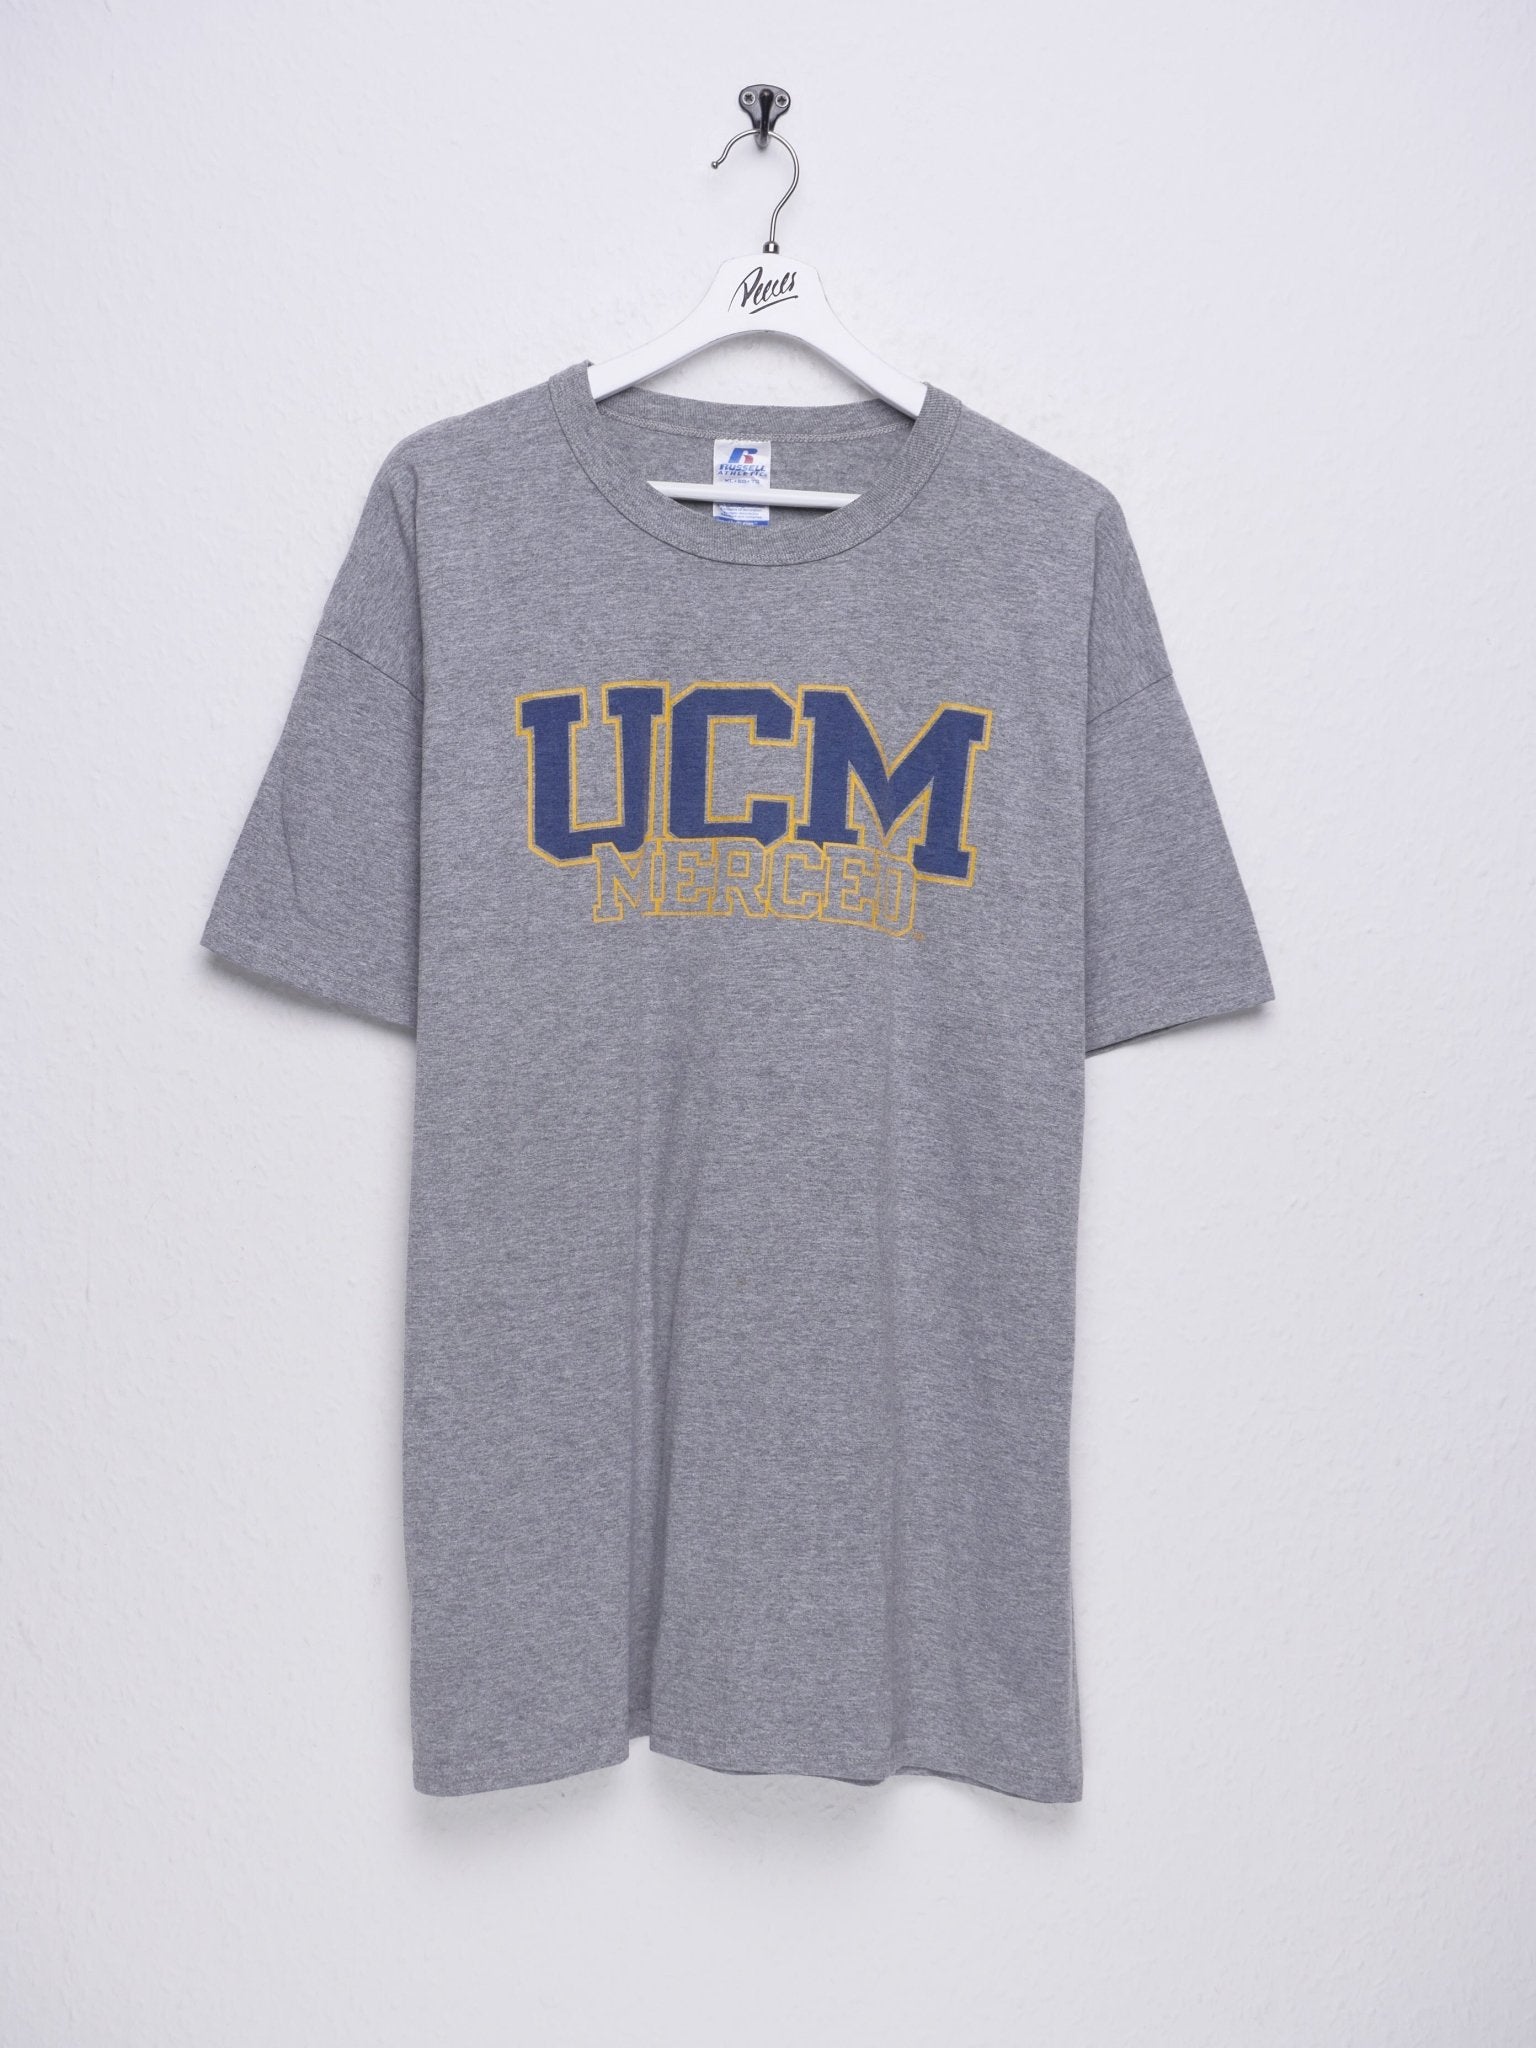 Russell Athletic UCM Merced printed Logo Shirt - Peeces